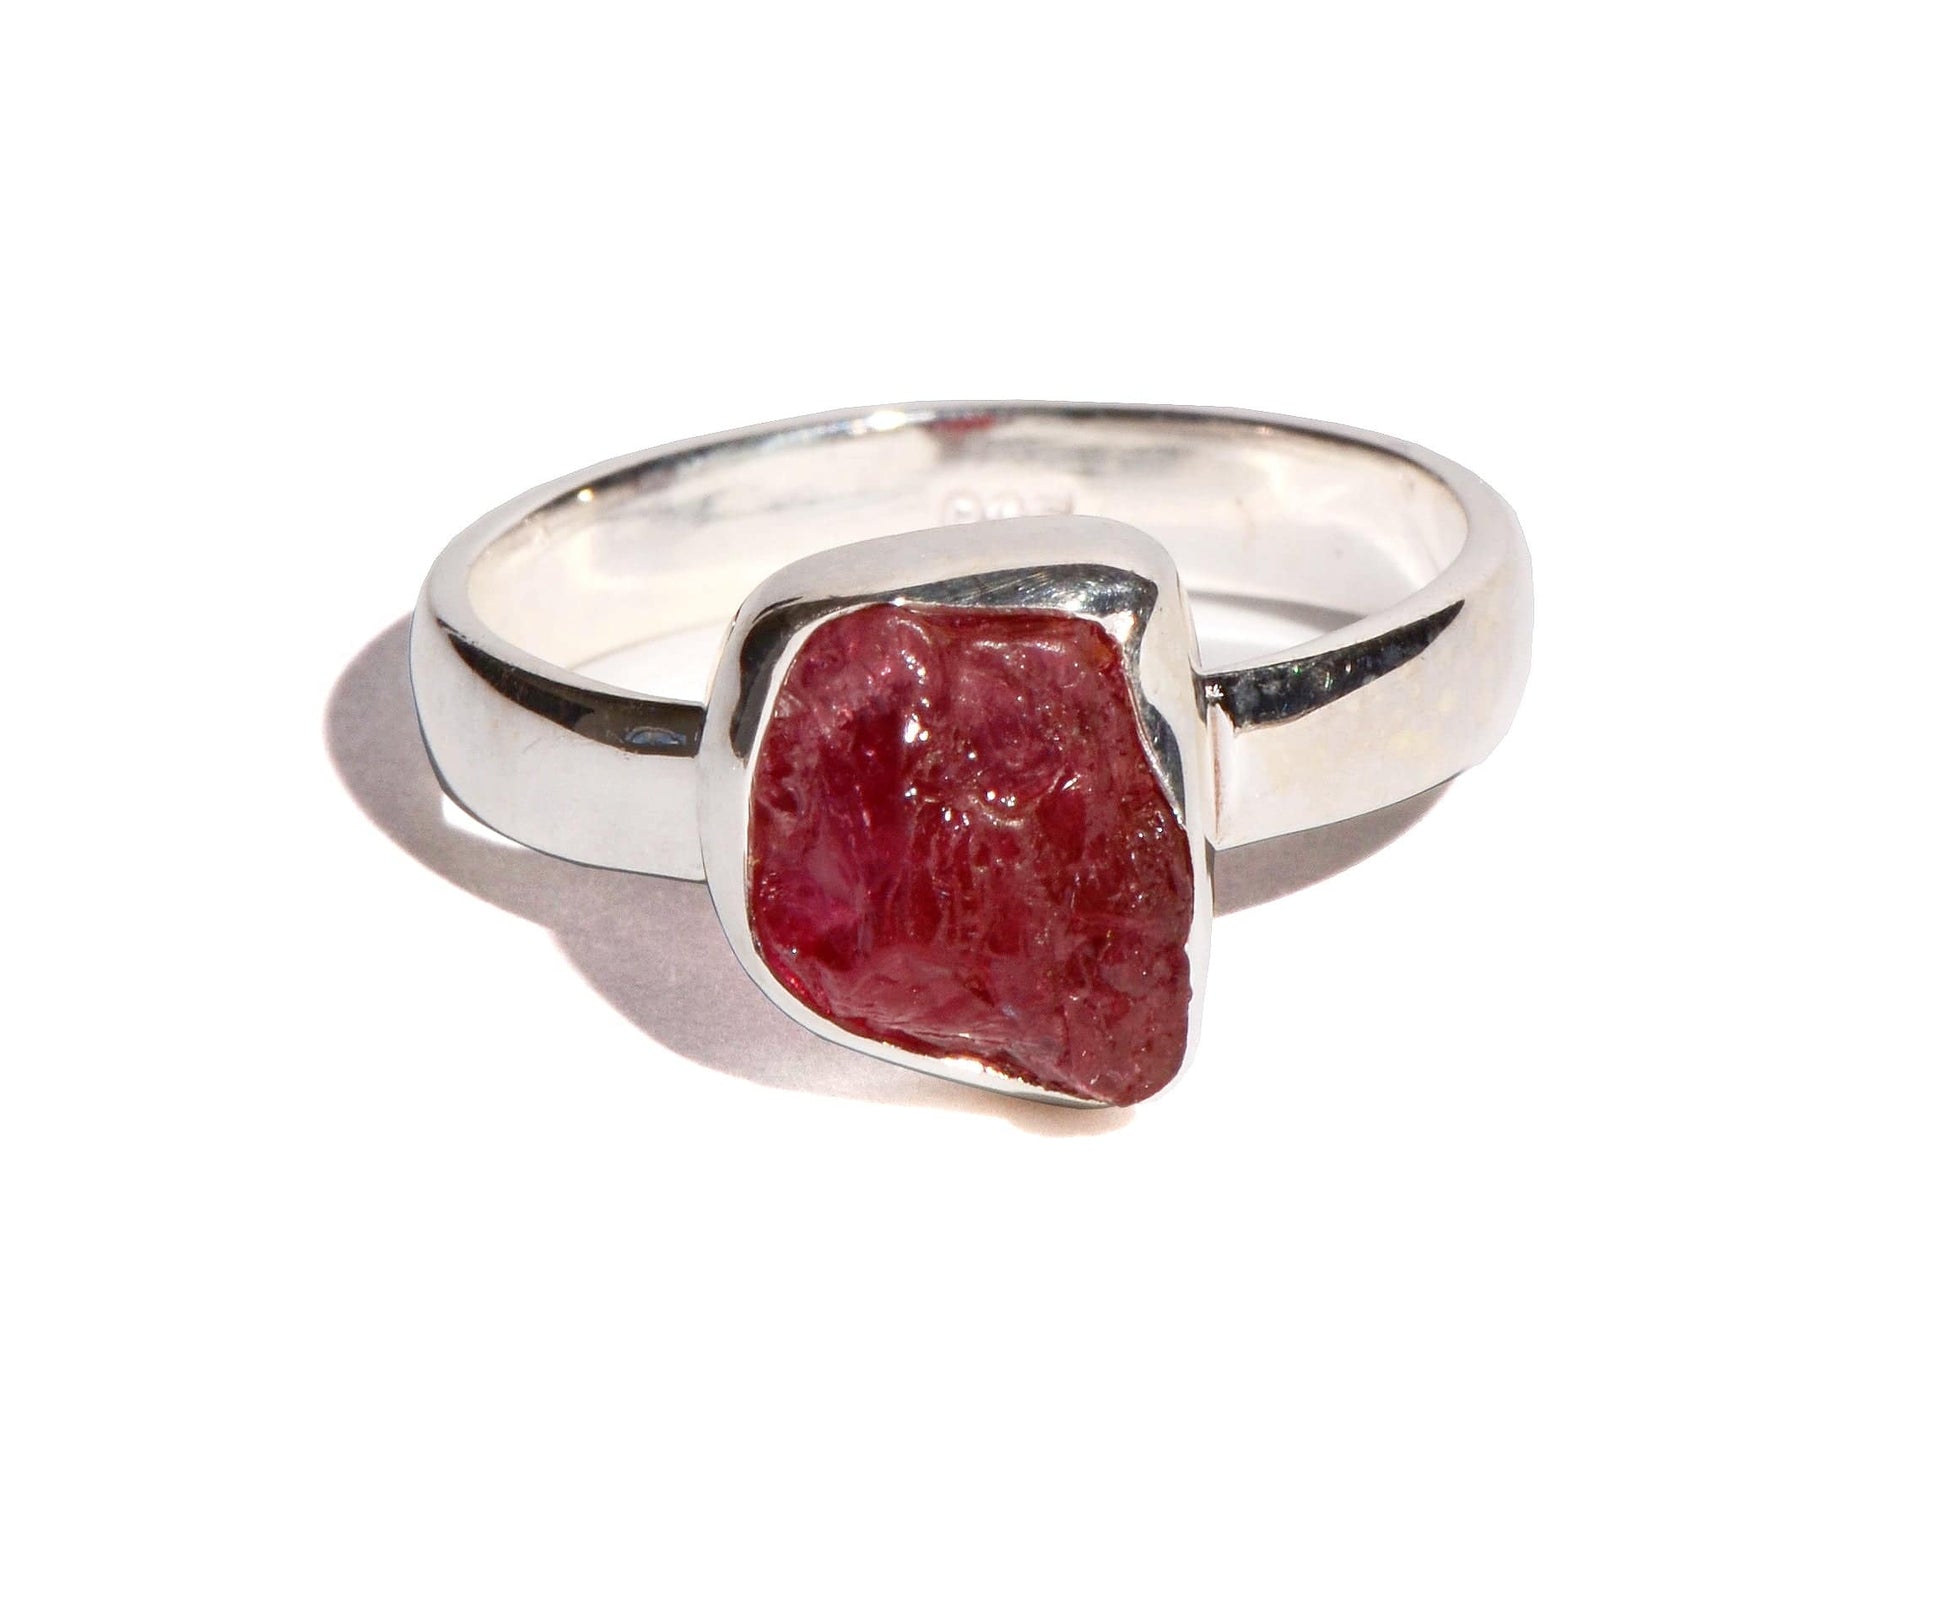 Pink Tourmaline Rough Sterling Silver Ring - Rough Crystal